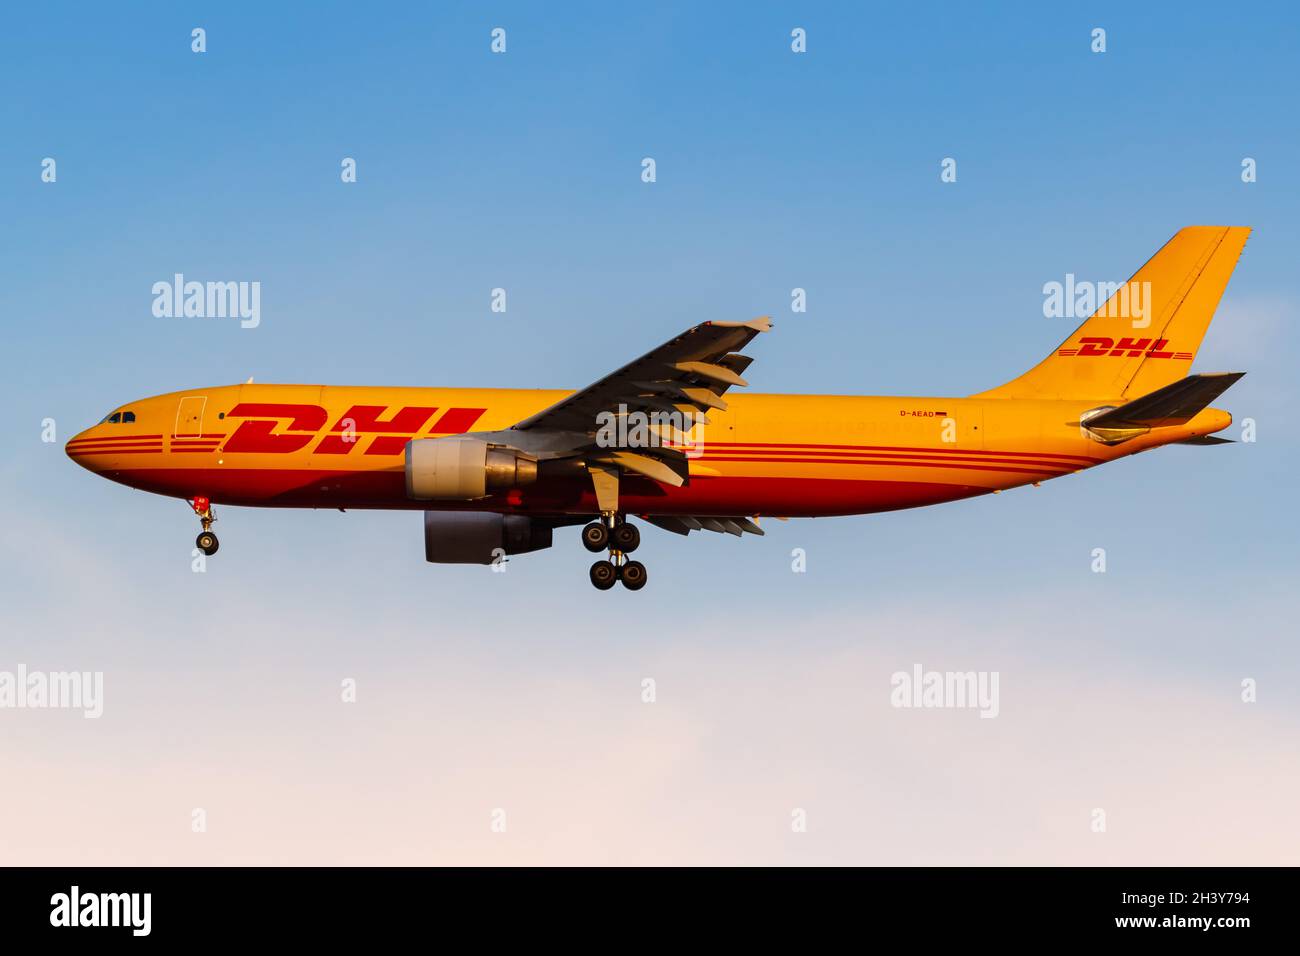 DHL European Air Transport Airbus A300-600F aircraft Athens airport in Greece Stock Photo